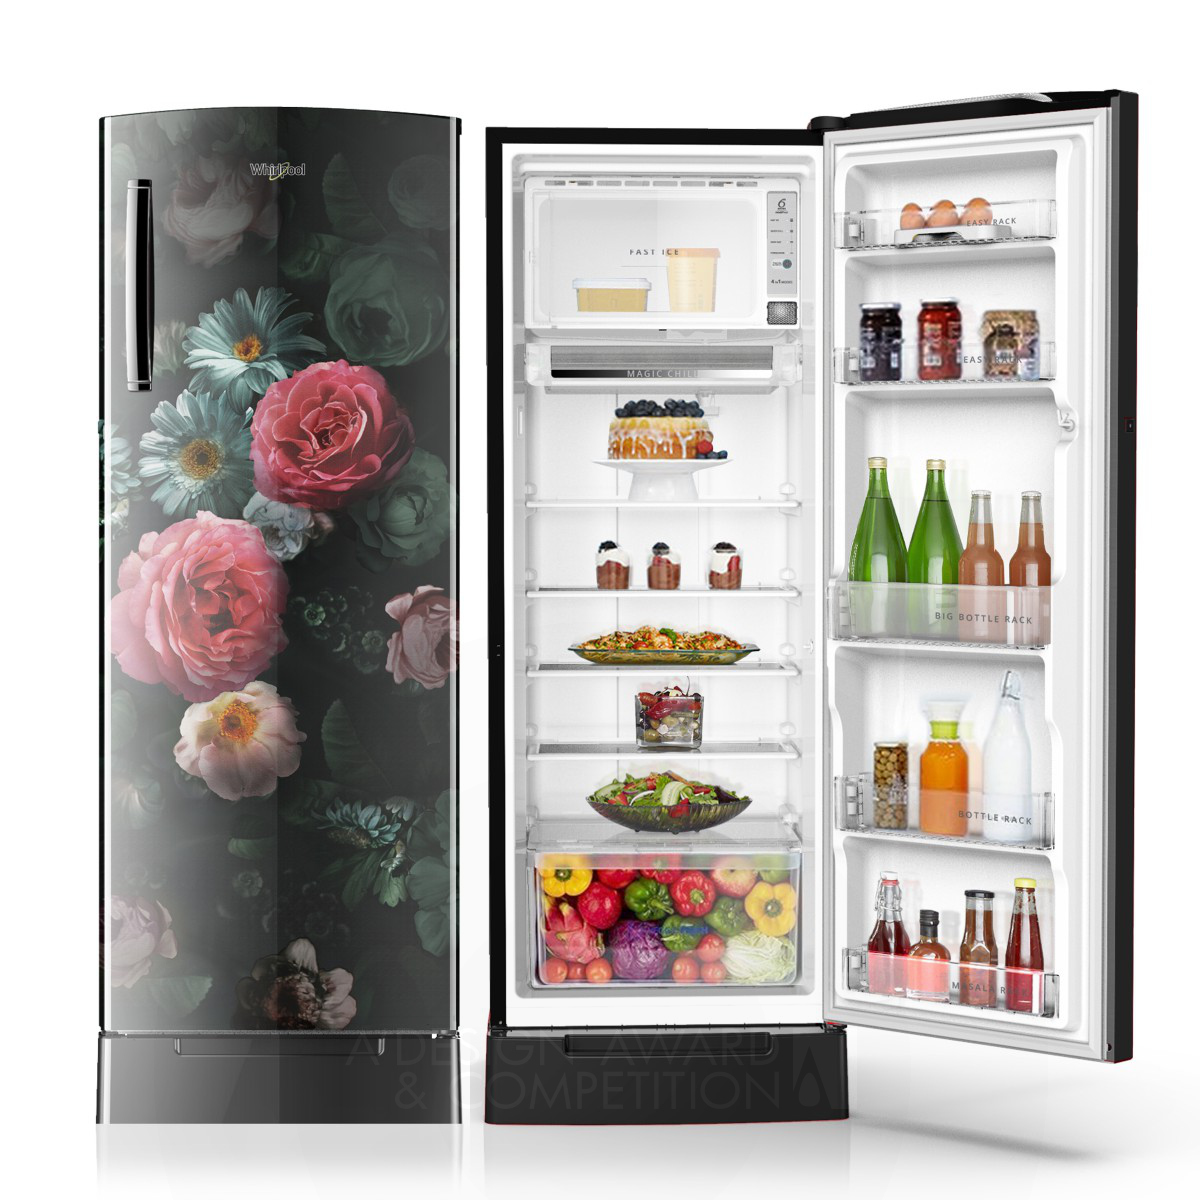 Whirlpool IceMagic Pro 2020: Setting New Standards in Refrigeration